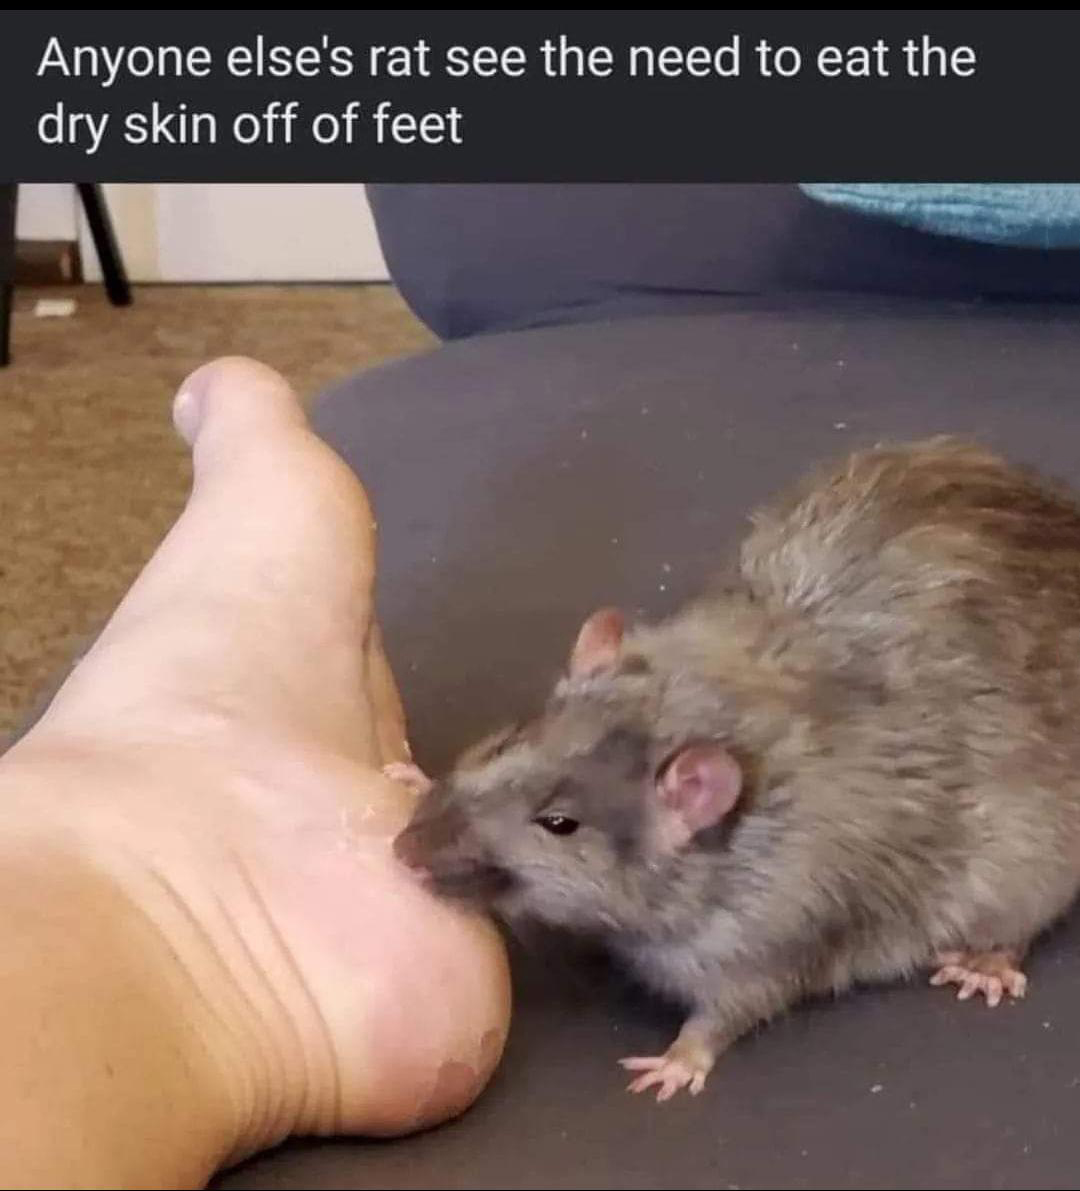 cringe - cringetopia - rat - Anyone else's rat see the need to eat the dry skin off of feet